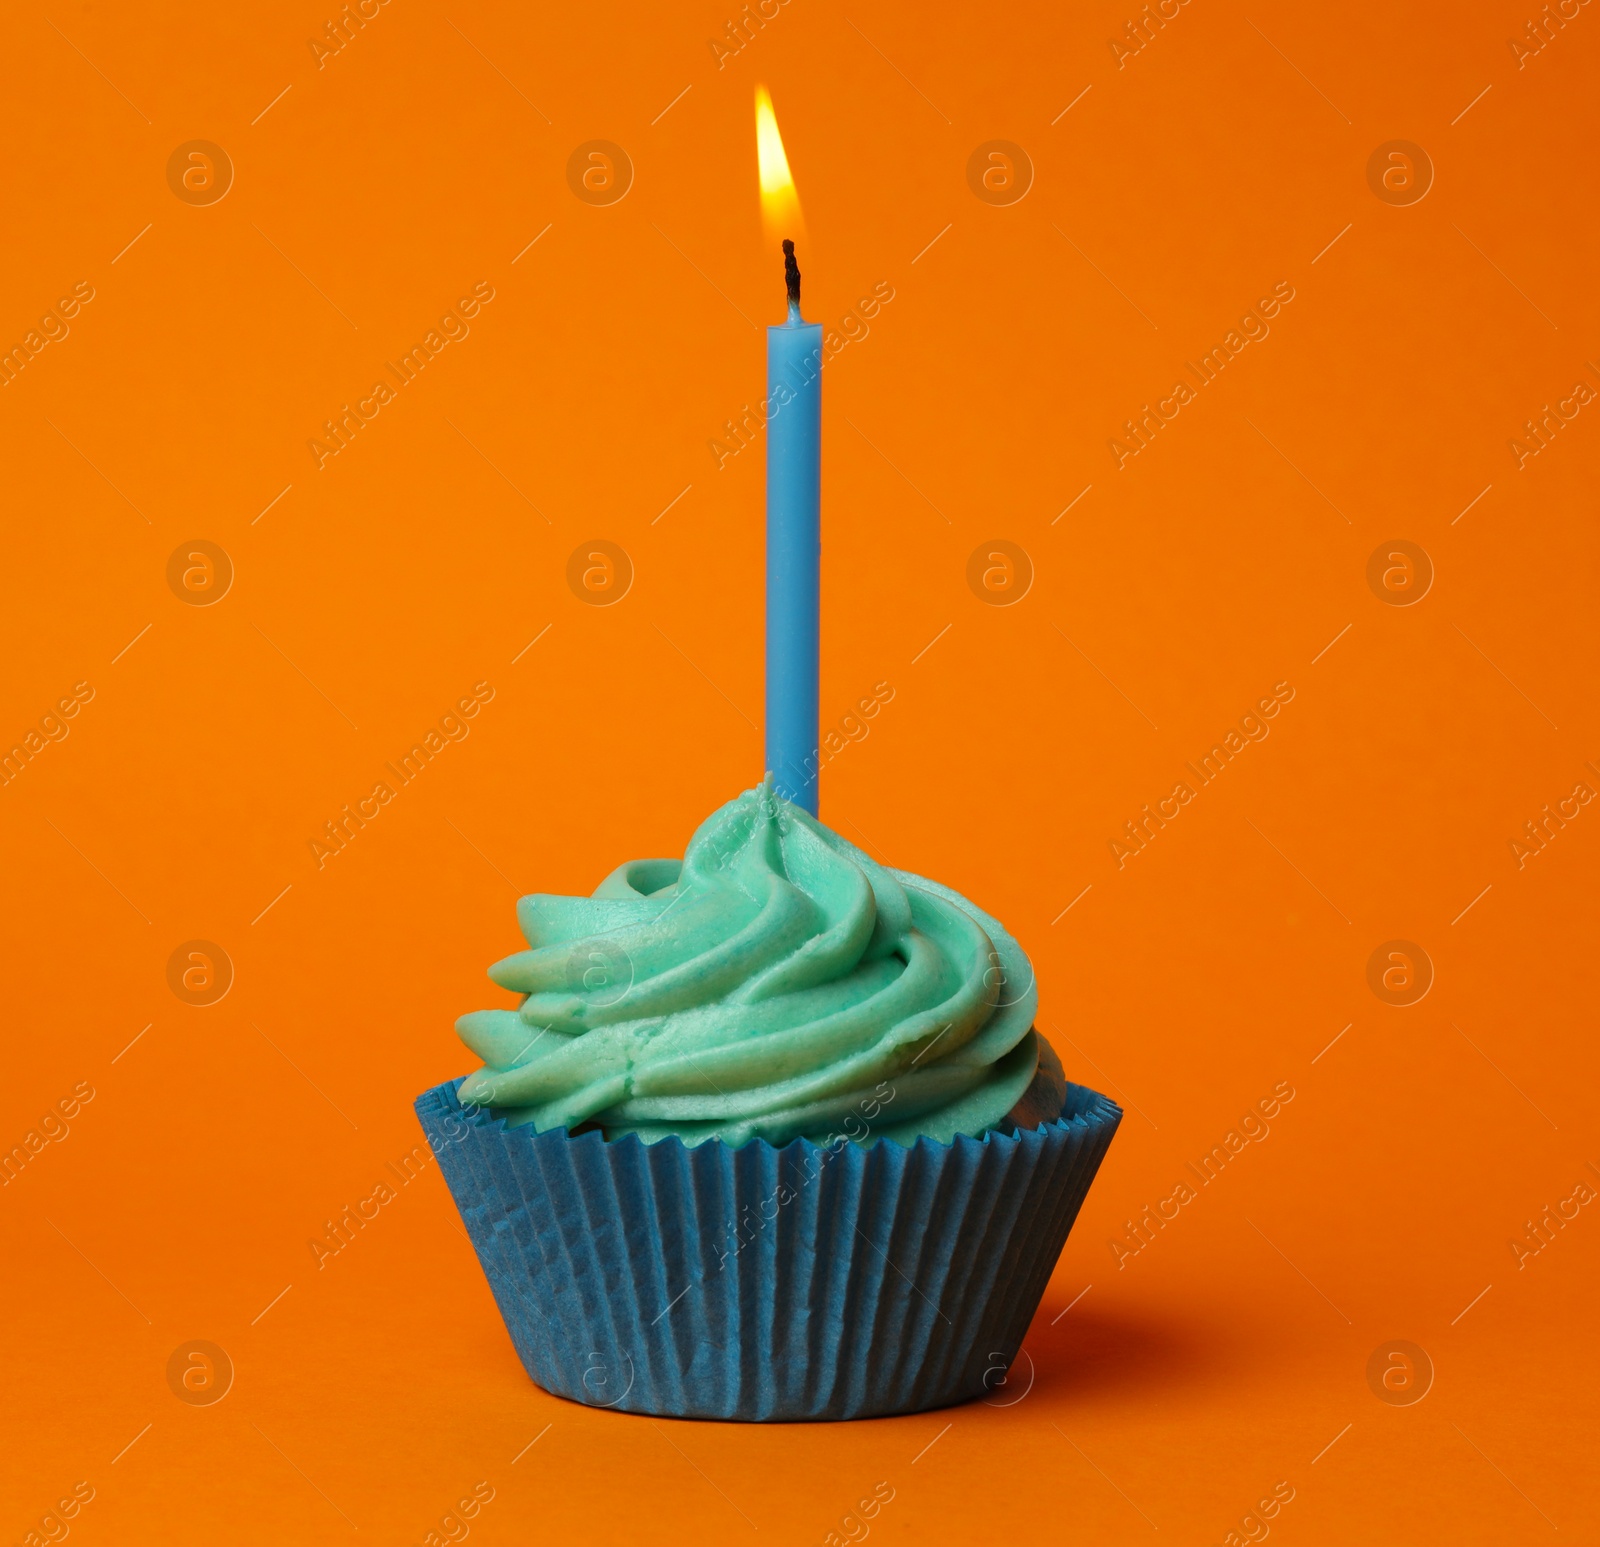 Photo of Delicious birthday cupcake with turquoise cream and burning candle on orange background